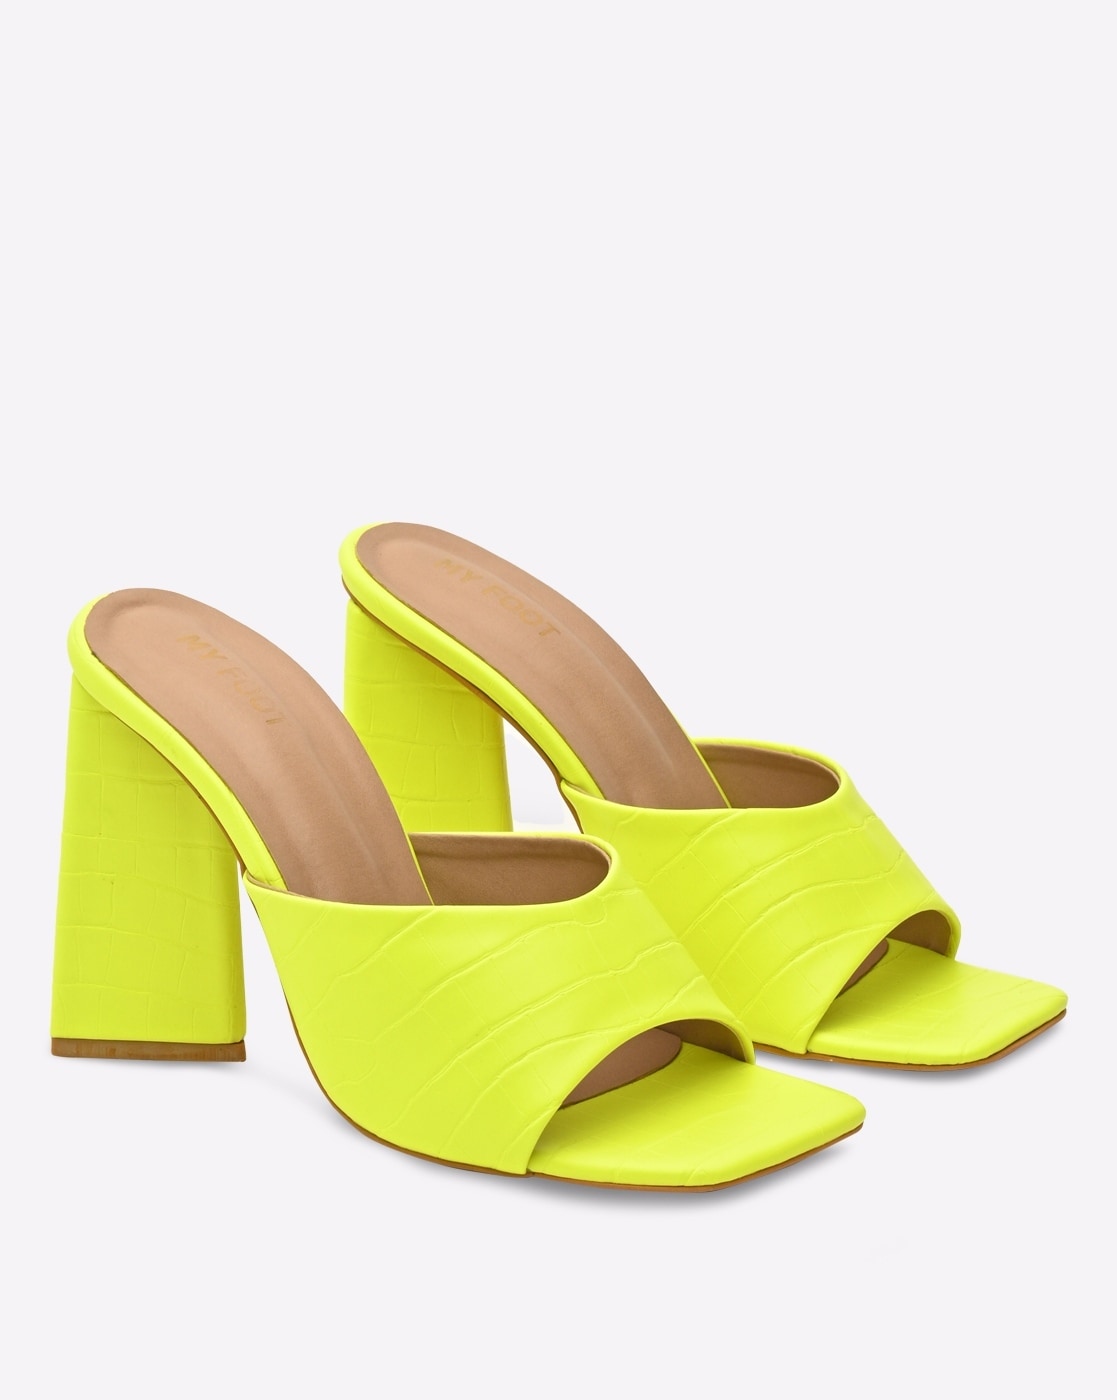 Comfortable High Heels That Are Affordable And... Yellow! • The Fashionable  Housewife